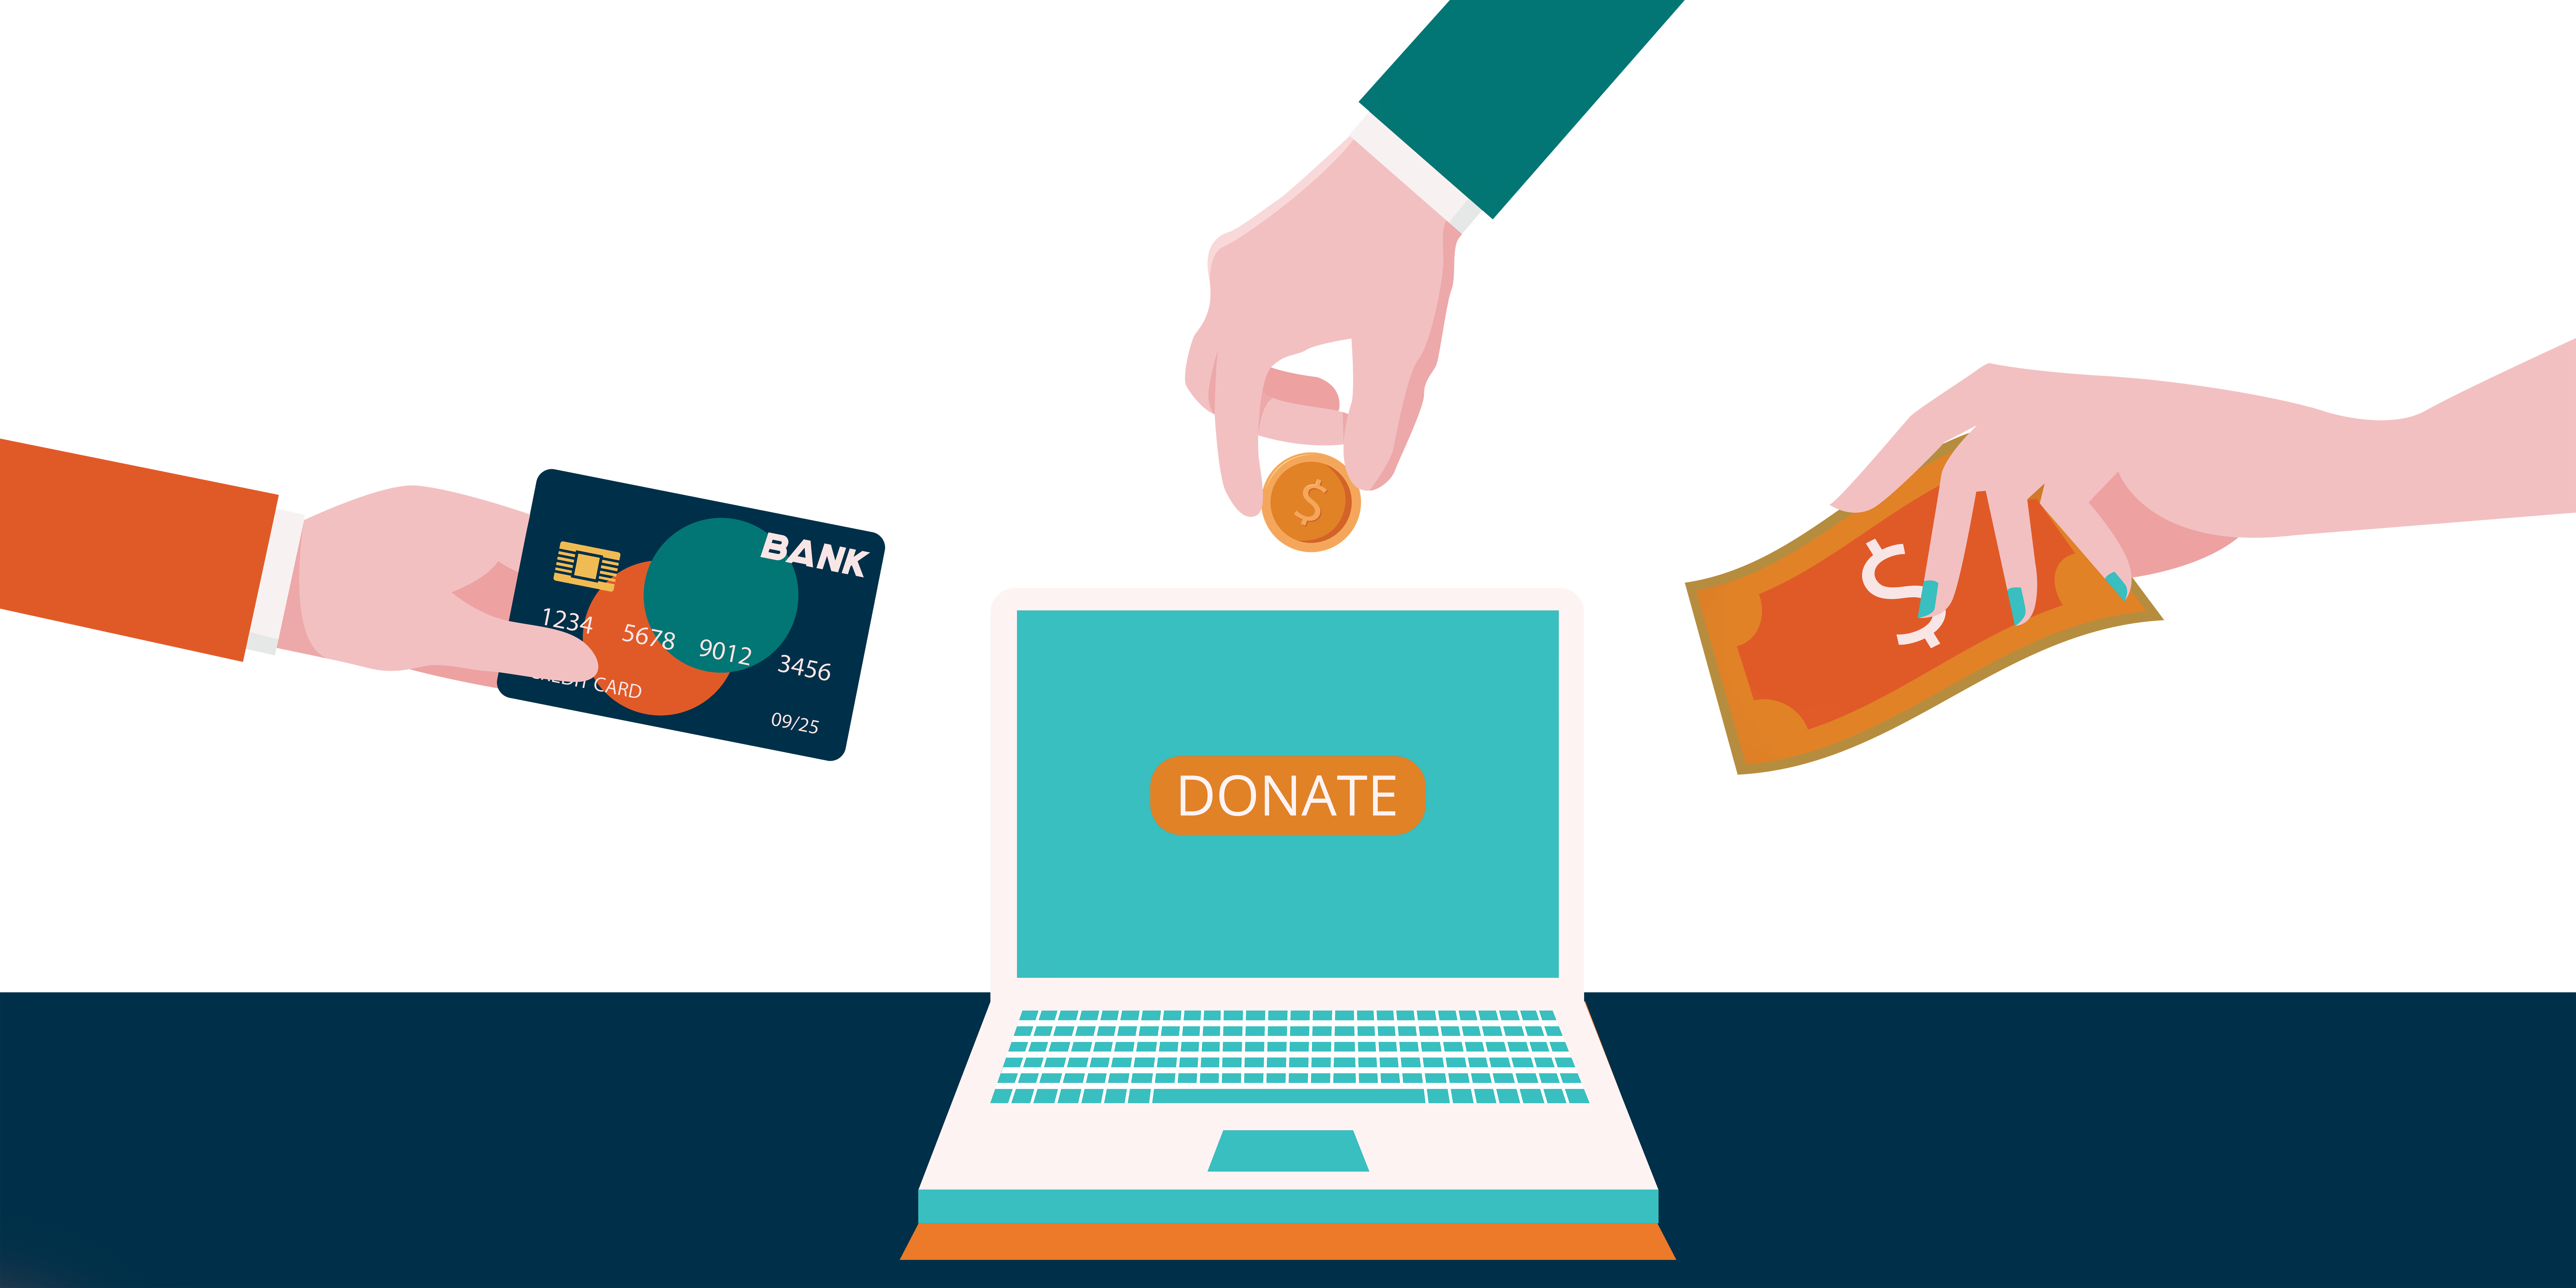 5 Key Tips for Donor Retention